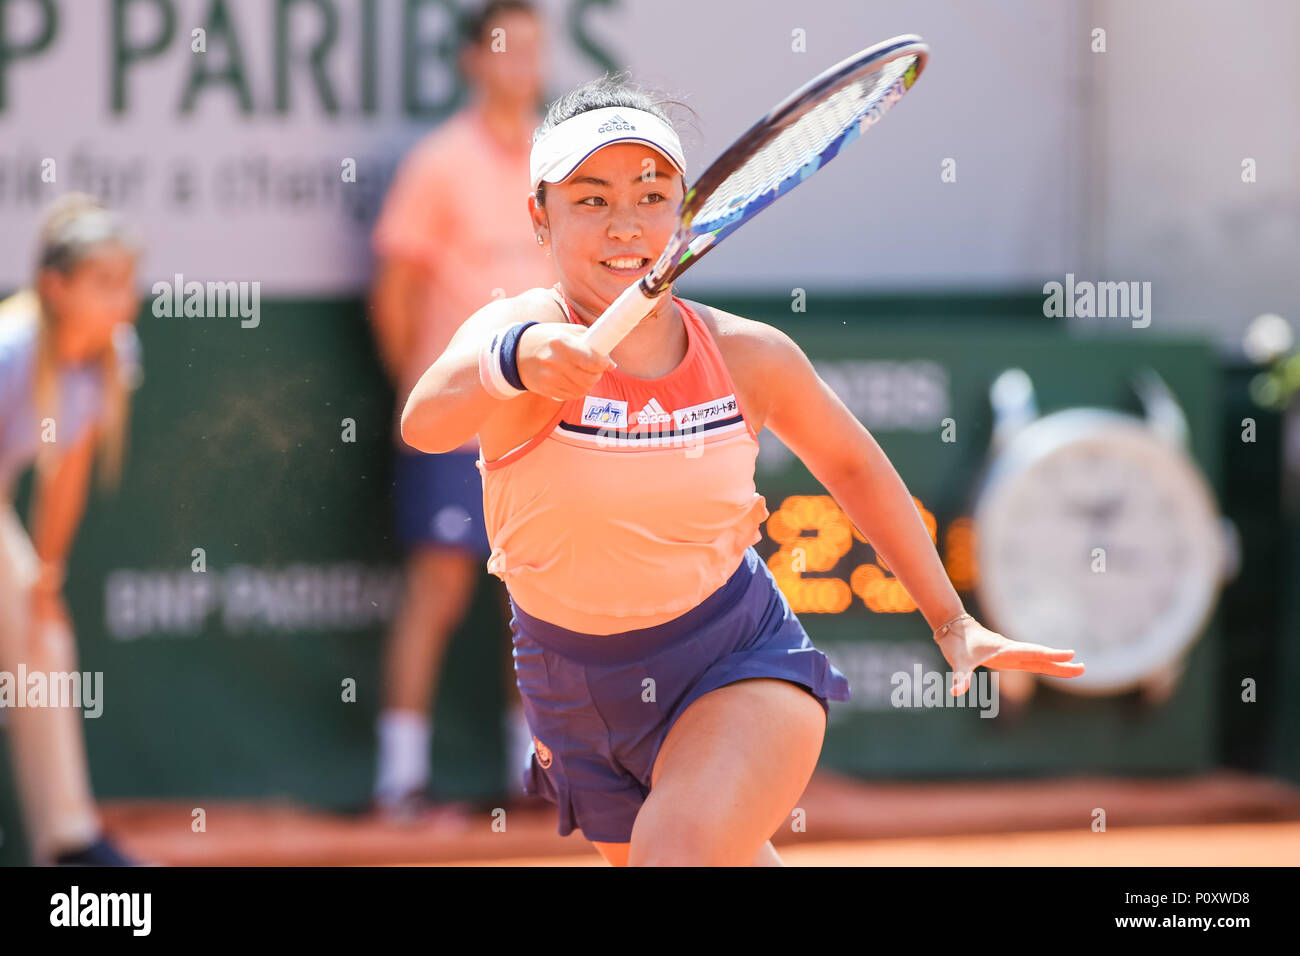 Eri Hozumi (JPN), JUNE 8, 2018 - Tennis : Eri Hozumi of Japan during the Women's doubles semi-final match of the French Open tennis tournament against Hao-Ching Chan of Taiwan and Zhaoxuan Yang of China at the Roland Garros in Paris, France. (Photo by AFLO) Stock Photo